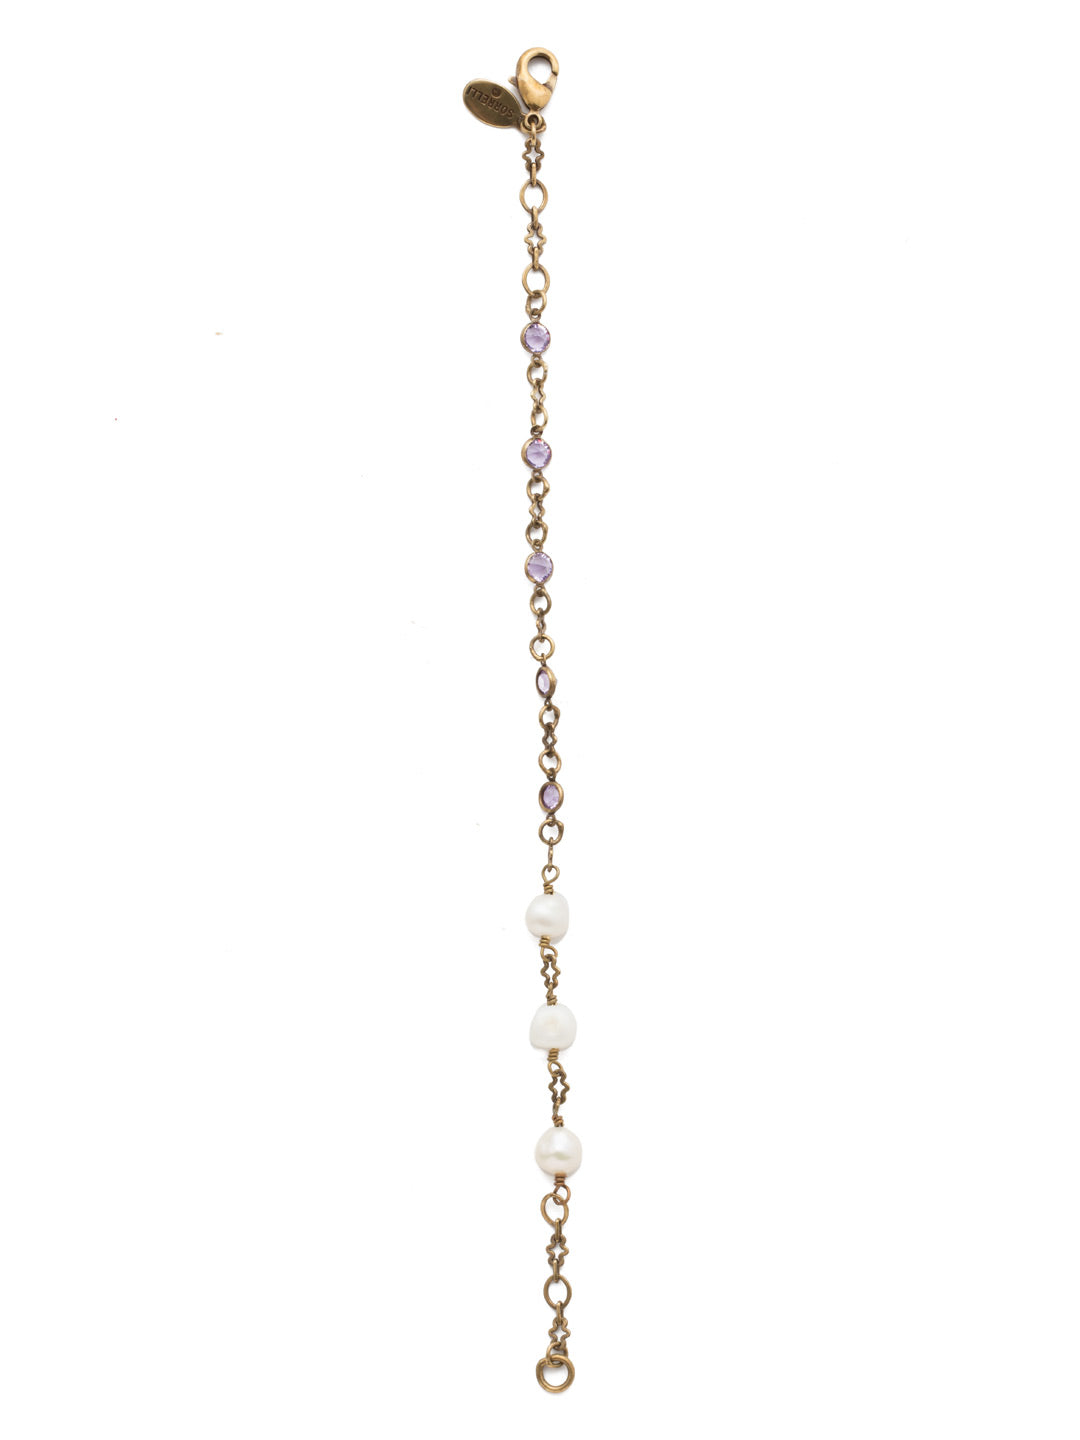 Fiona Tennis Bracelet - BEK27AGIRB - Tennis bracelets are always a jewelry box must-have, with a delicate chain and pearl accents. From Sorrelli's Iris Bloom collection in our Antique Gold-tone finish.